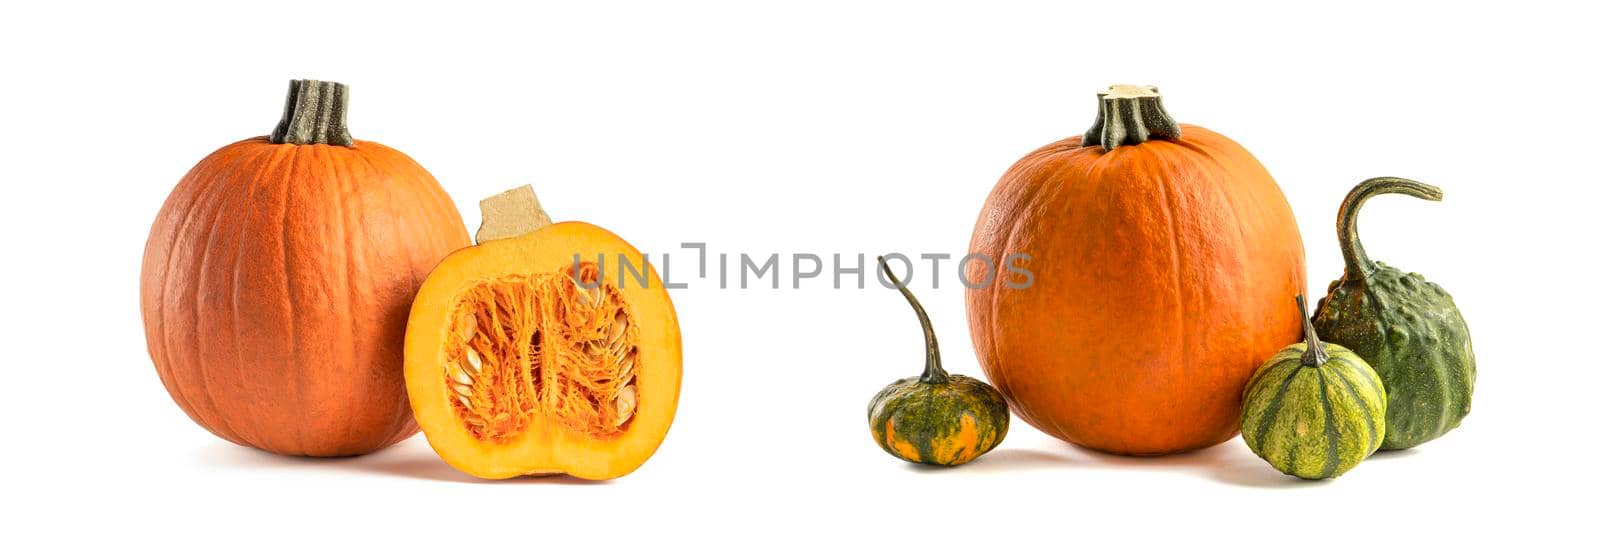 Autumn set of pumpkins isolated on white background for Halloween decoration. Set of pumpkins of different colors and shapes, green and orange by SERSOL